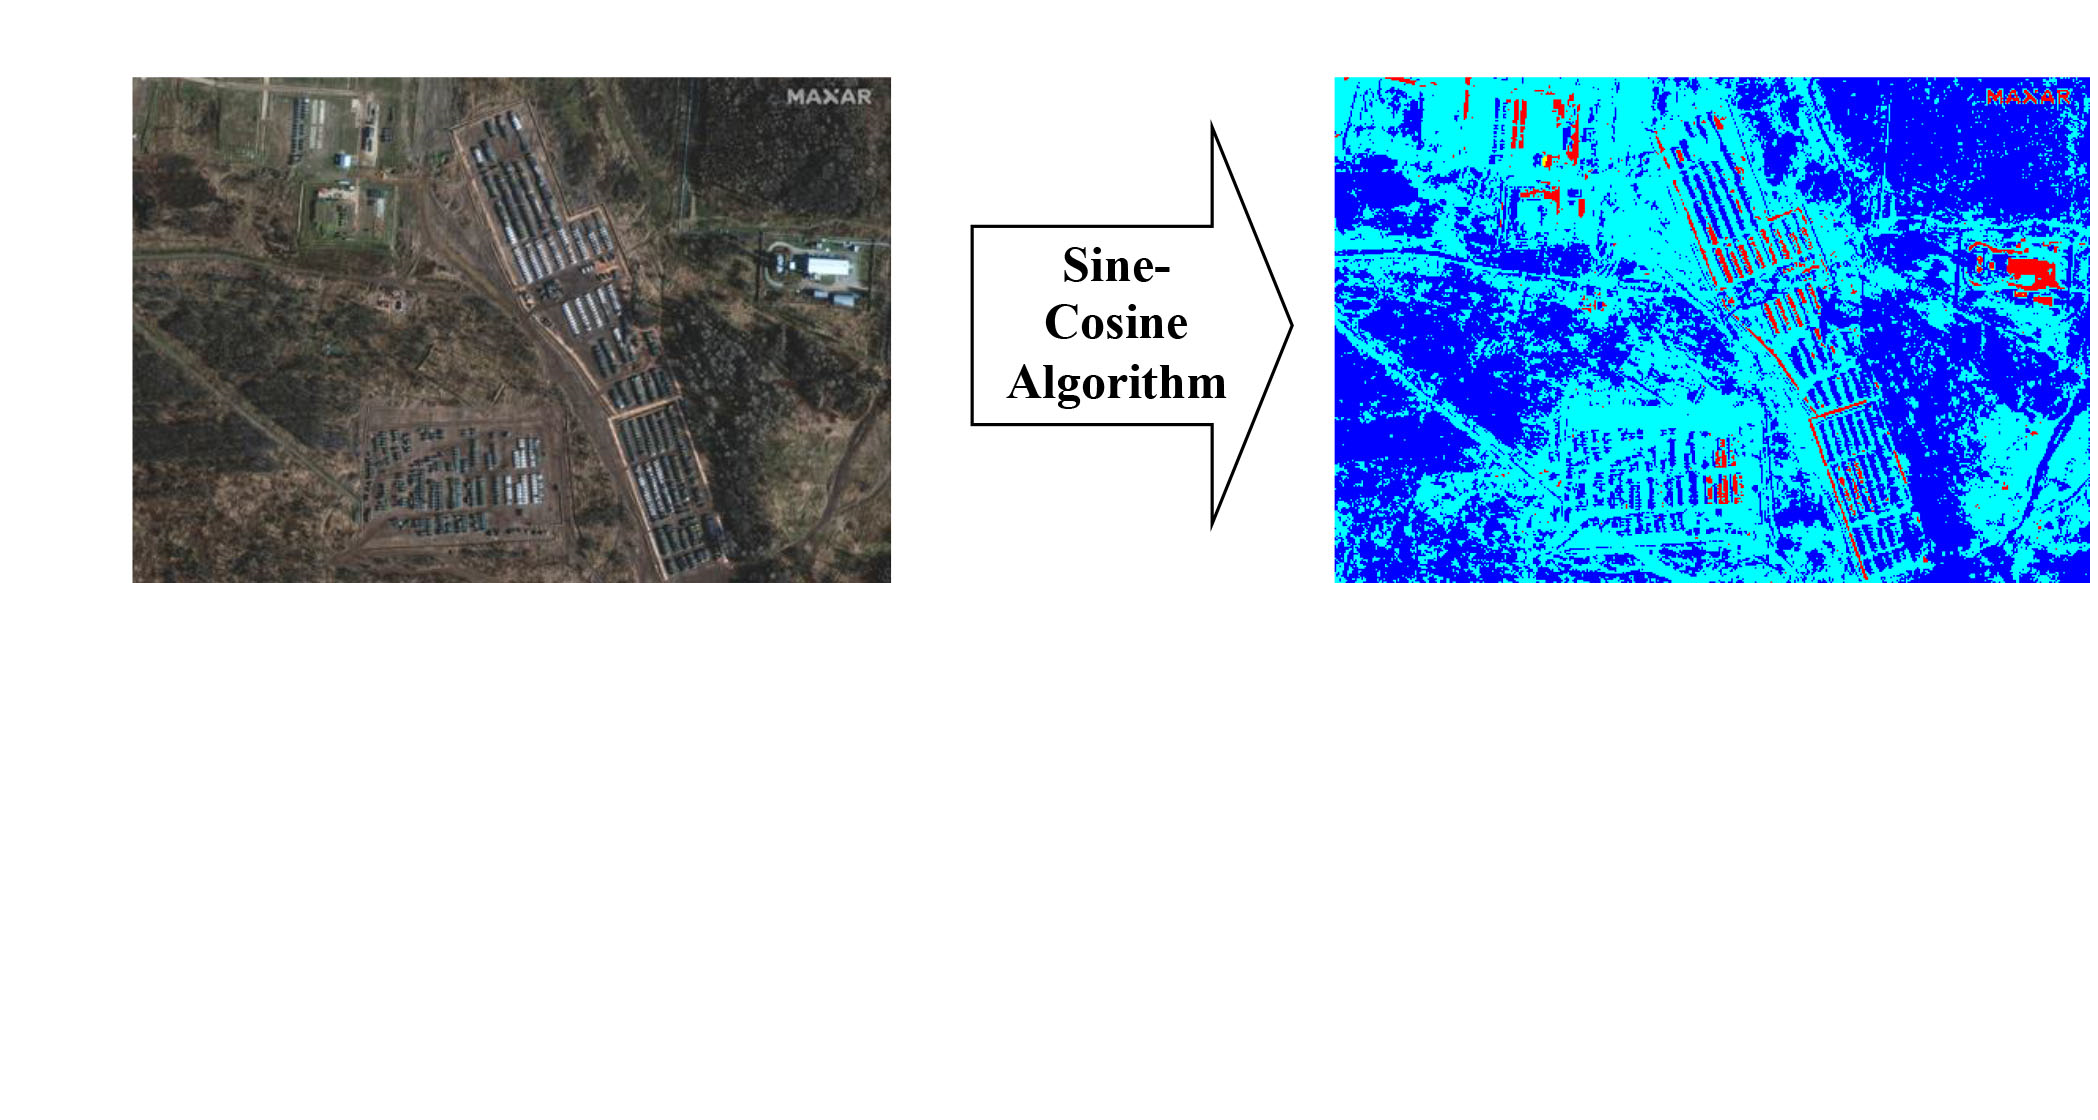 Devising a method for segmenting images acquired from space optical and electronic observation systems based on the Sine-Cosine algorithm 